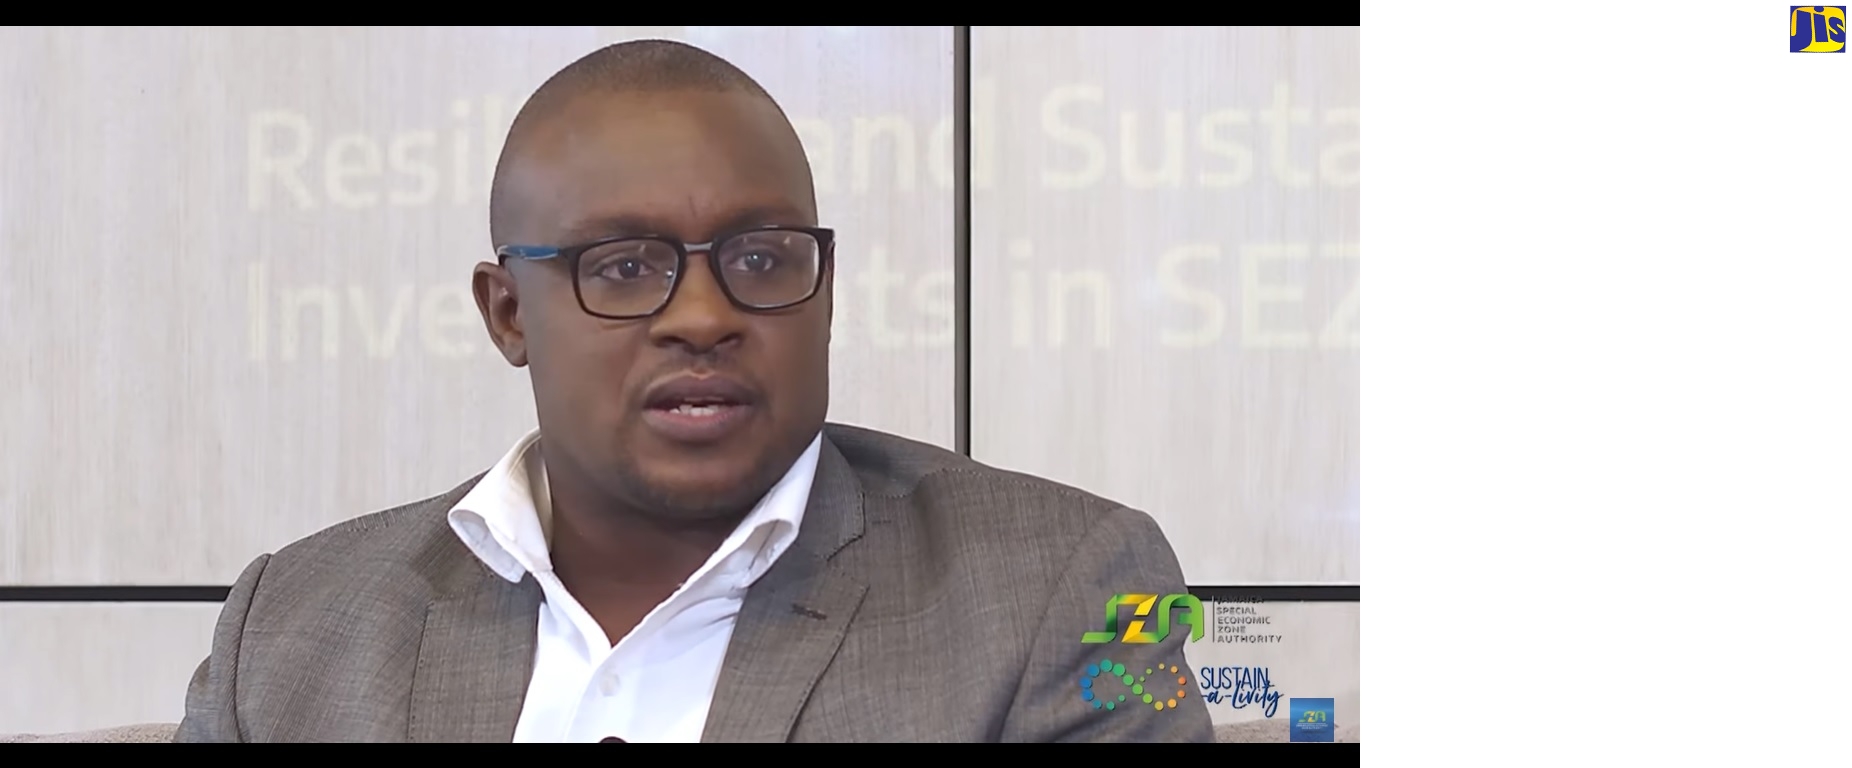 Senior Director of Regulations, Policy, Monitoring and Enforcement at the Jamaica Special Economic Zone Authority (JSEZA), Ainsley Brown, speaking at the JSEZA Virtual Summit earlier this year. Mr. Brown says by identifying and prioritising key industries for economic growth, Jamaica can experience structural transformation. 